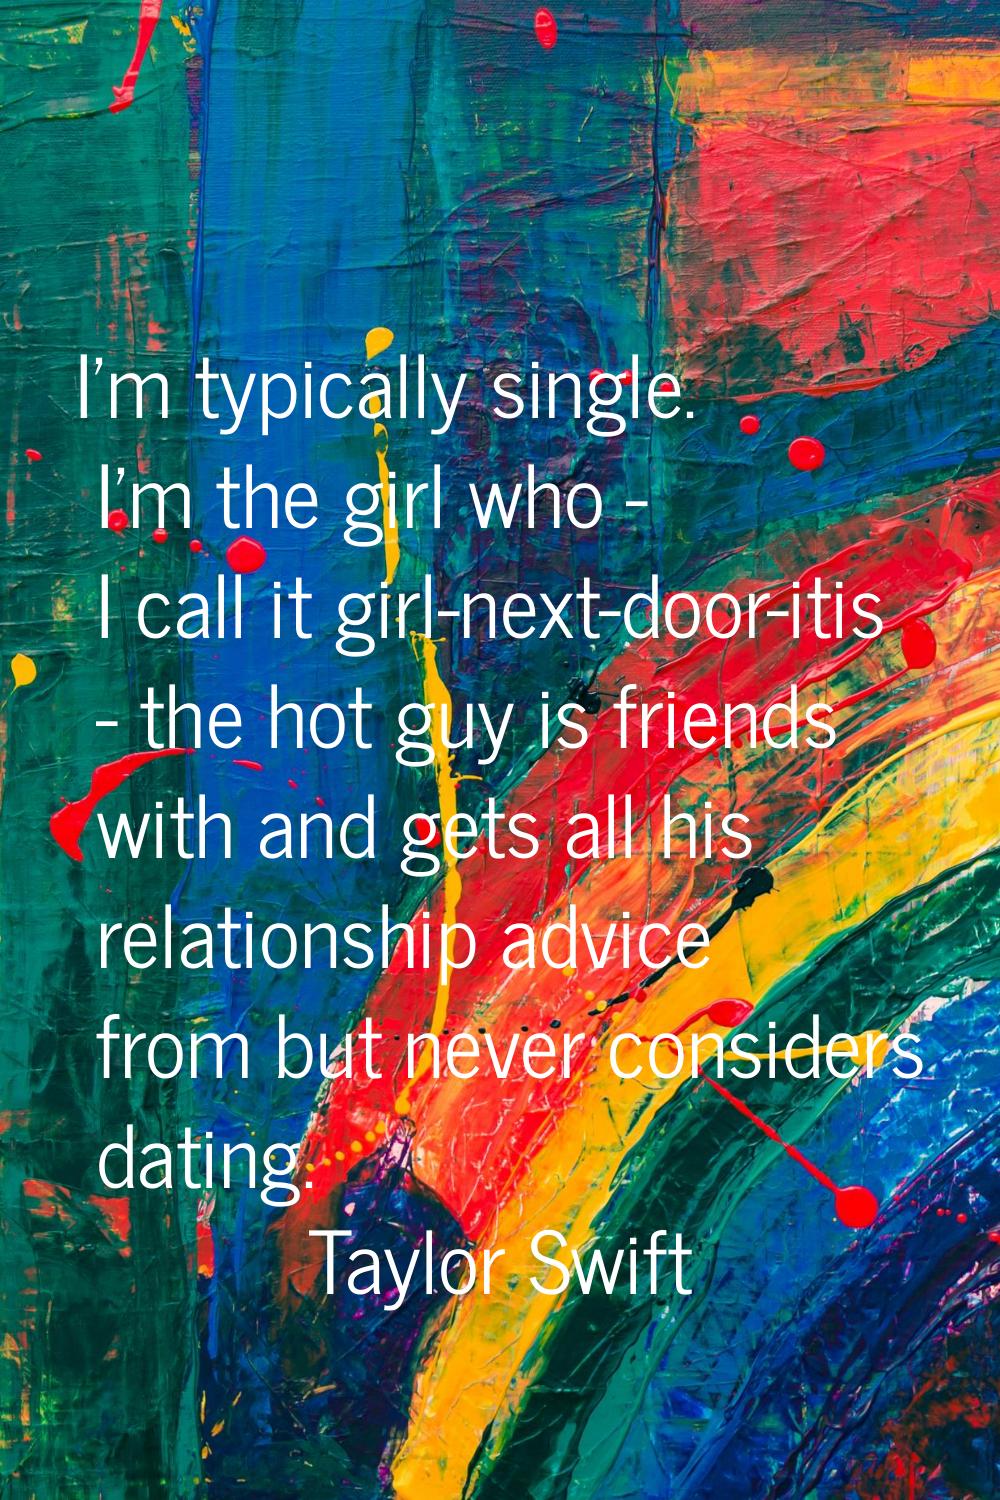 I'm typically single. I'm the girl who - I call it girl-next-door-itis - the hot guy is friends wit